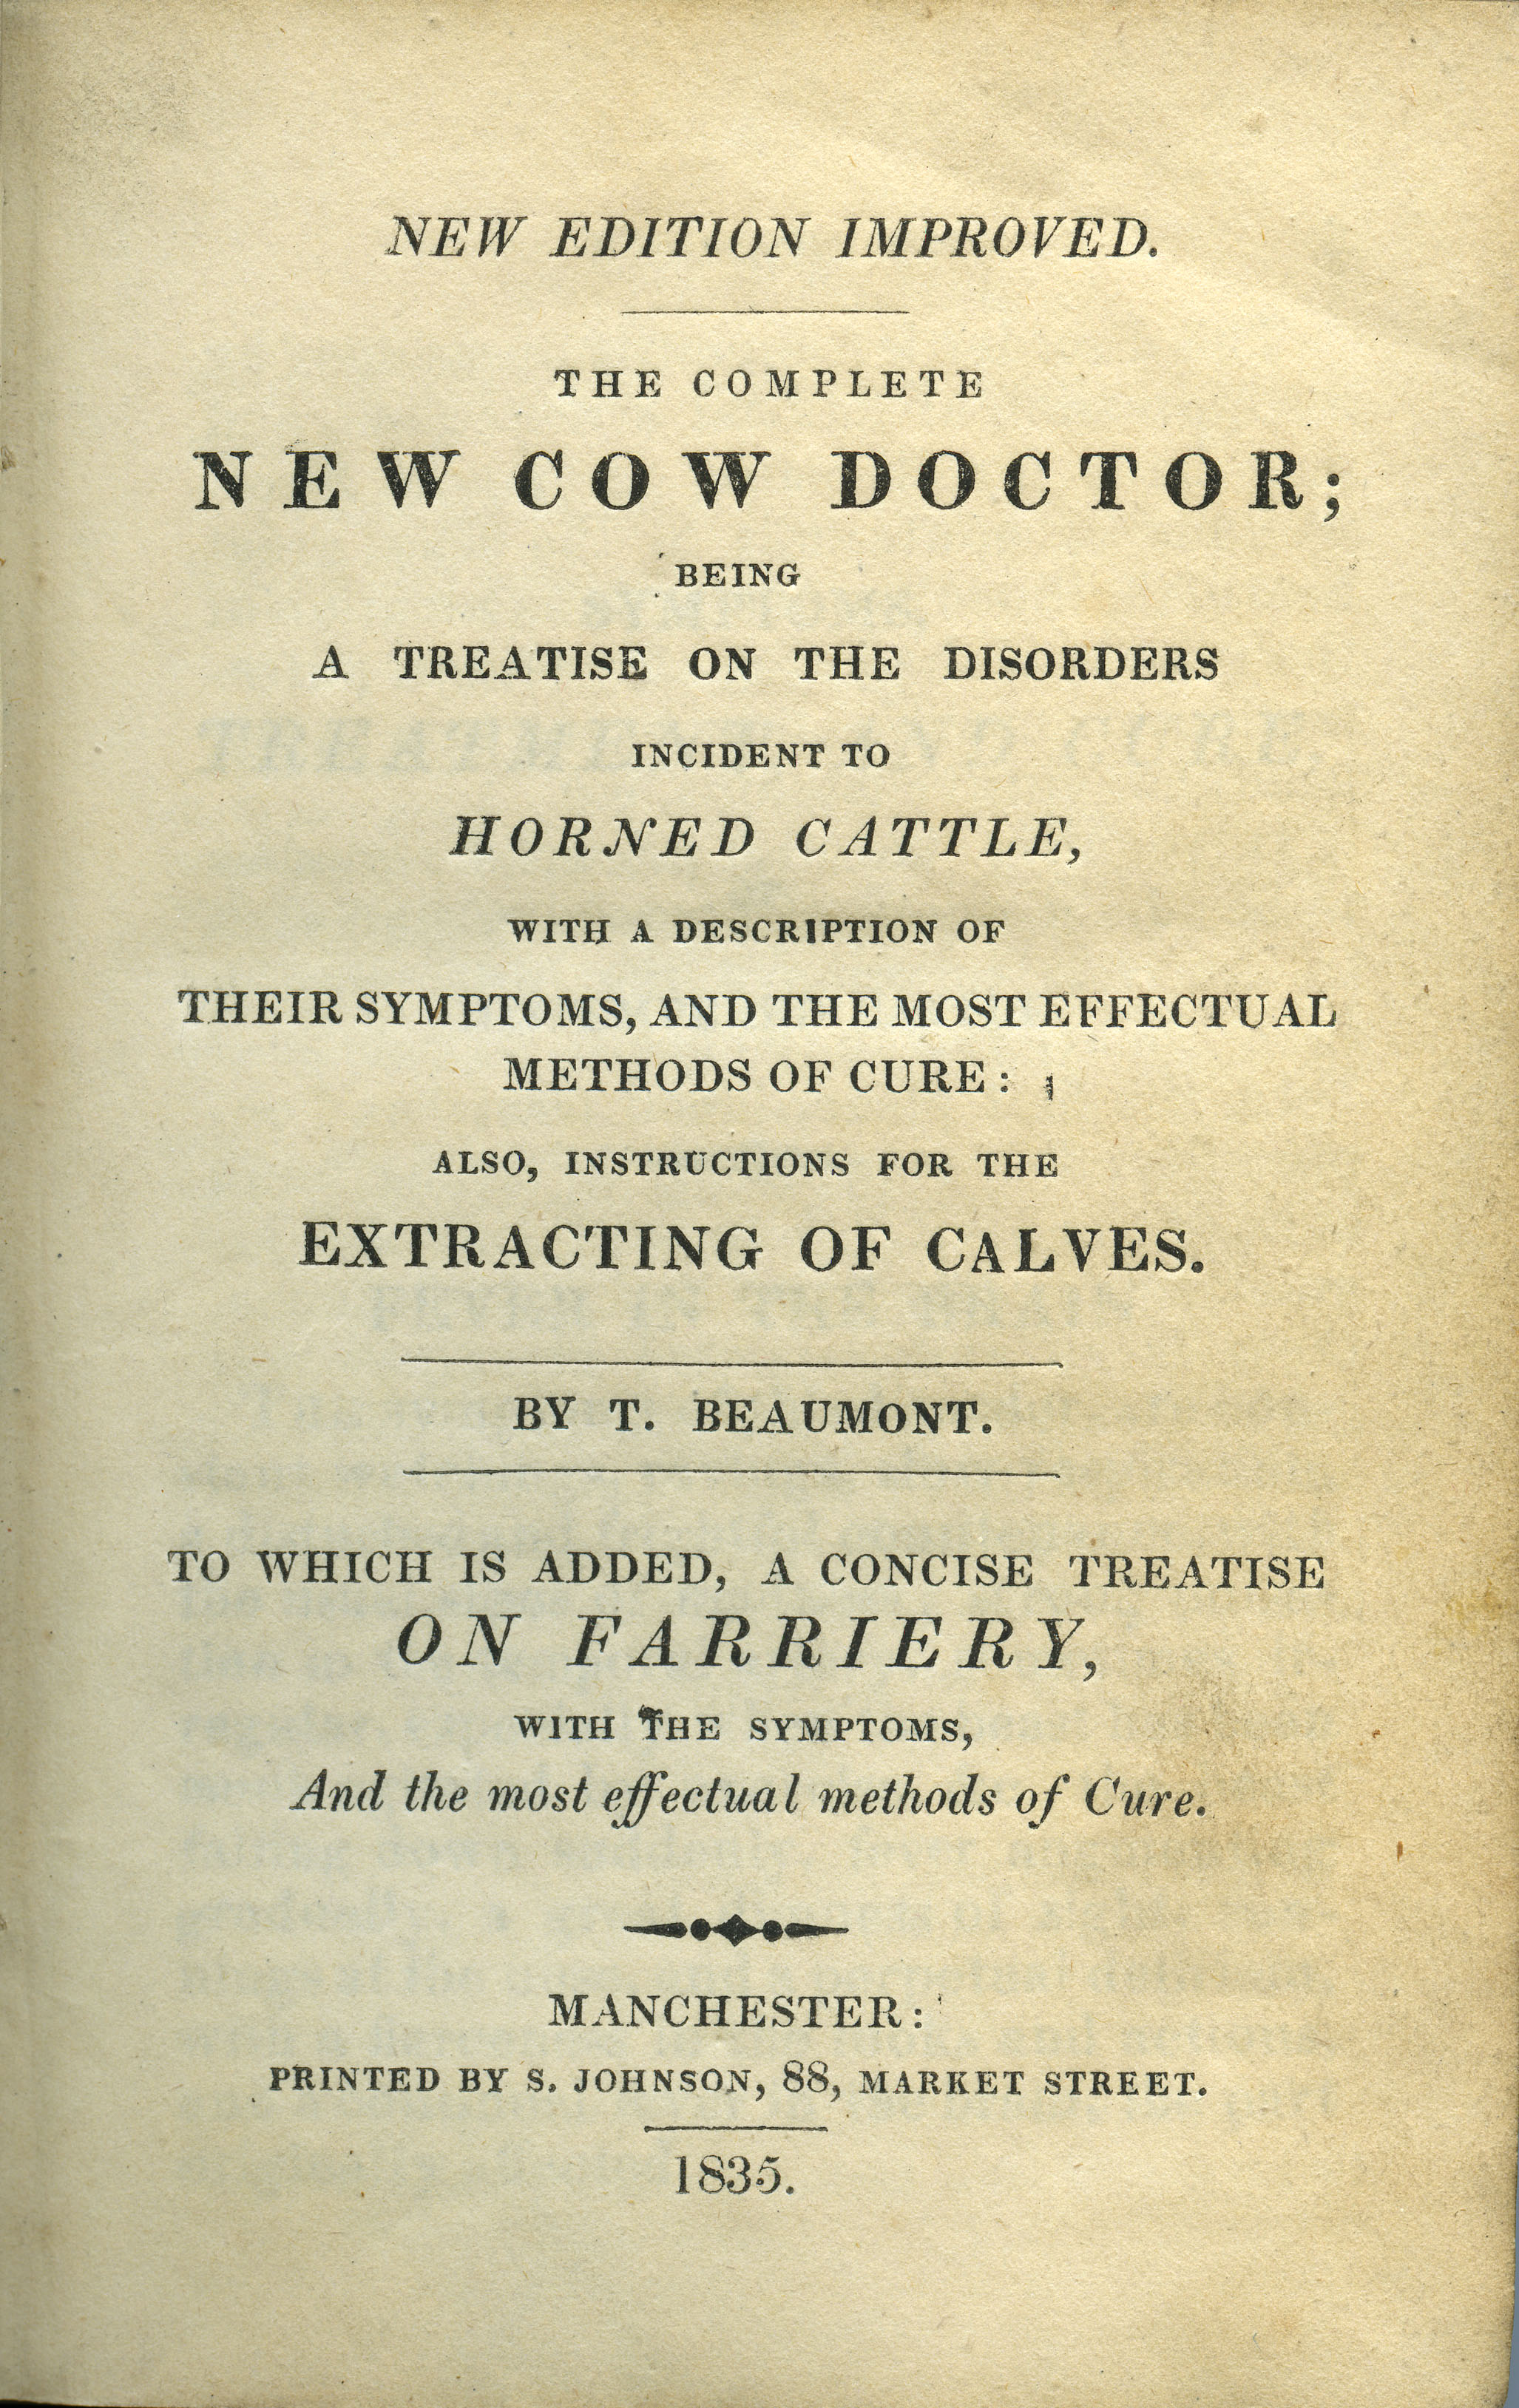 Beaumont's New Cow Doctor